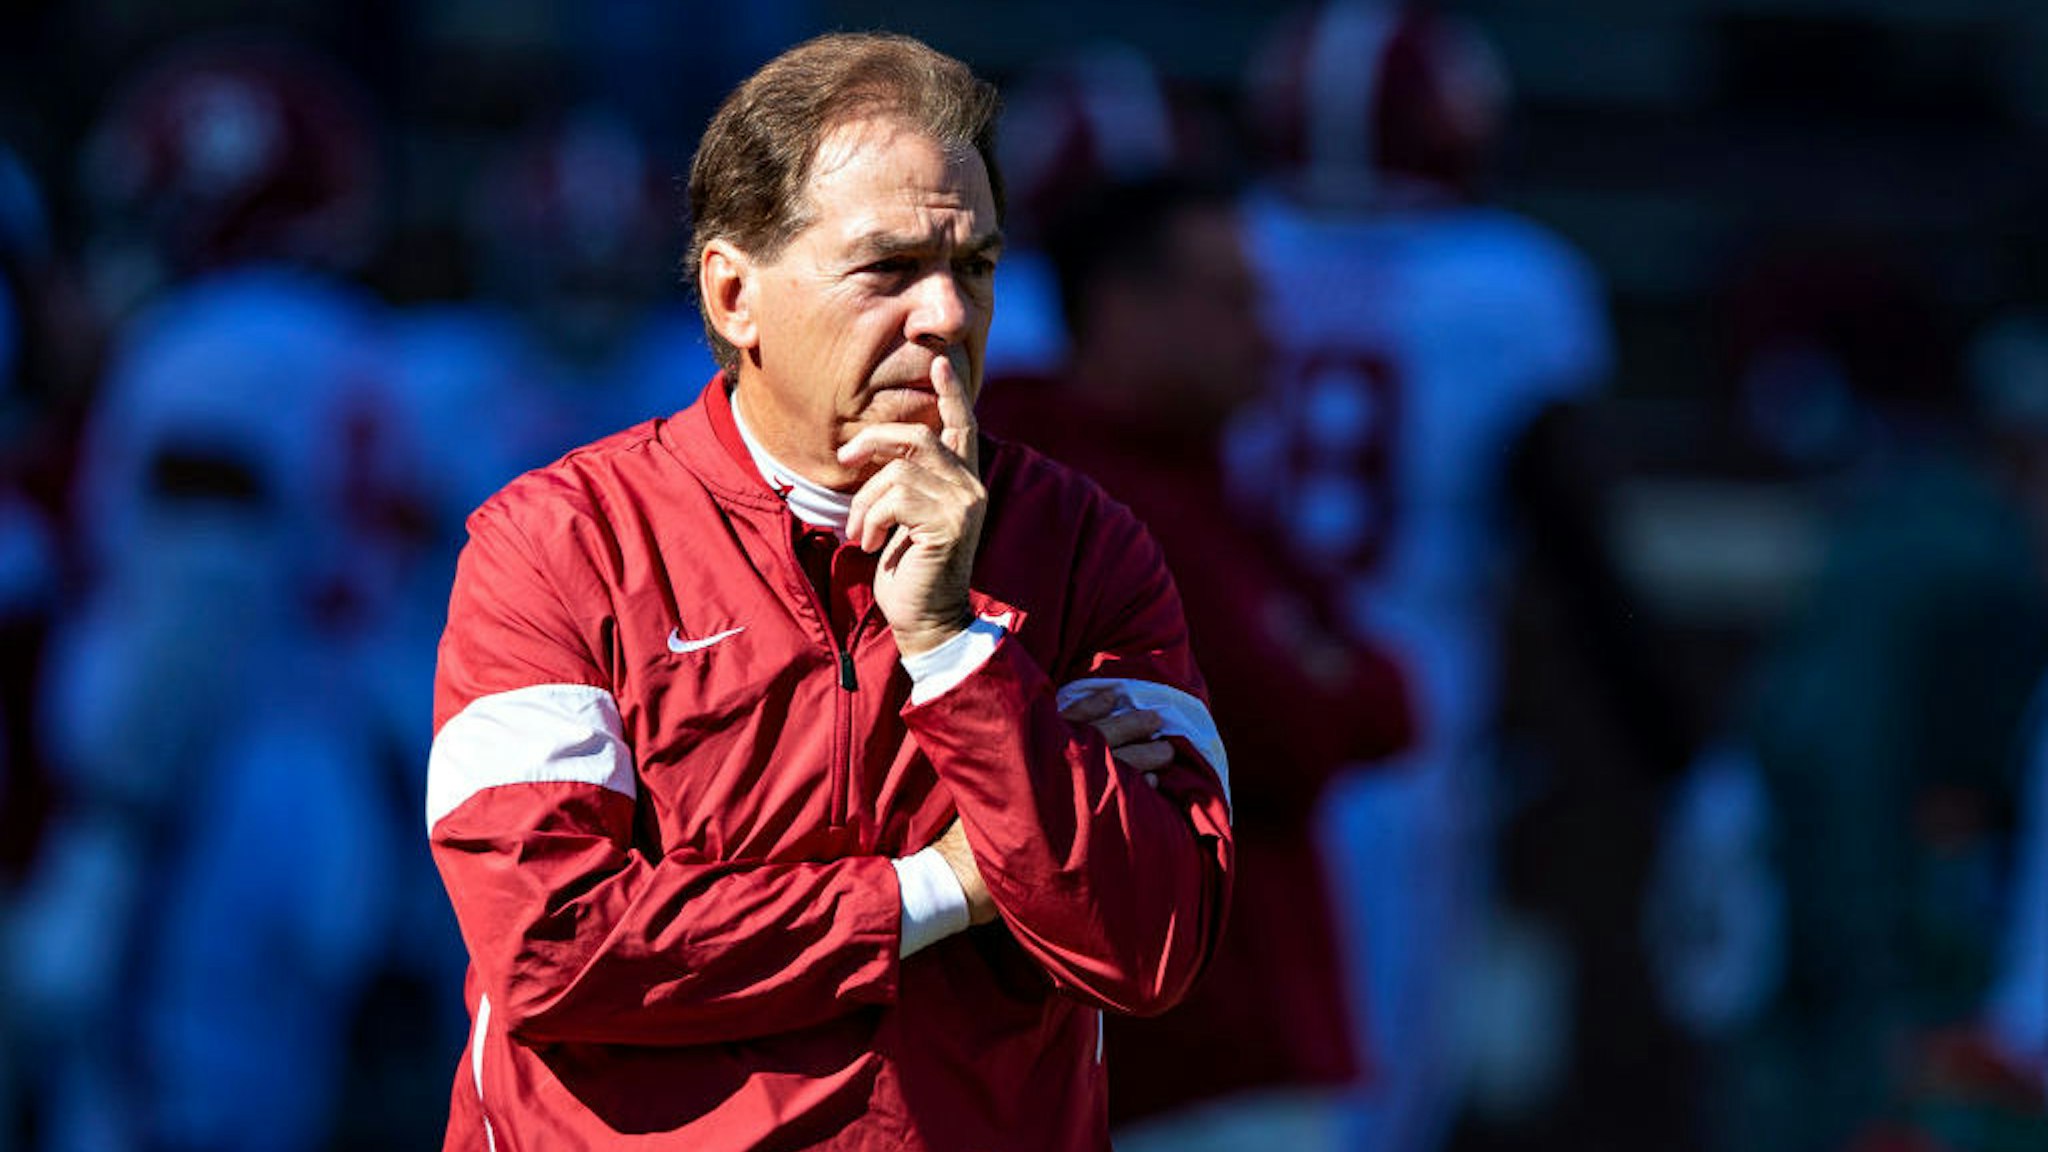 FAYETTEVILLE, AR - NOVEMBER 9: Head Coach Nick Saban of the Alabama Crimson Tide on the field watching his team warm up before a game against the Mississippi State Bulldogs at Davis Wade Stadium on November 16, 2019 in Starkville, Mississippi. The Crimson Tide defeated the Bulldogs 38-7. (Photo by Wesley Hitt/Getty Images)